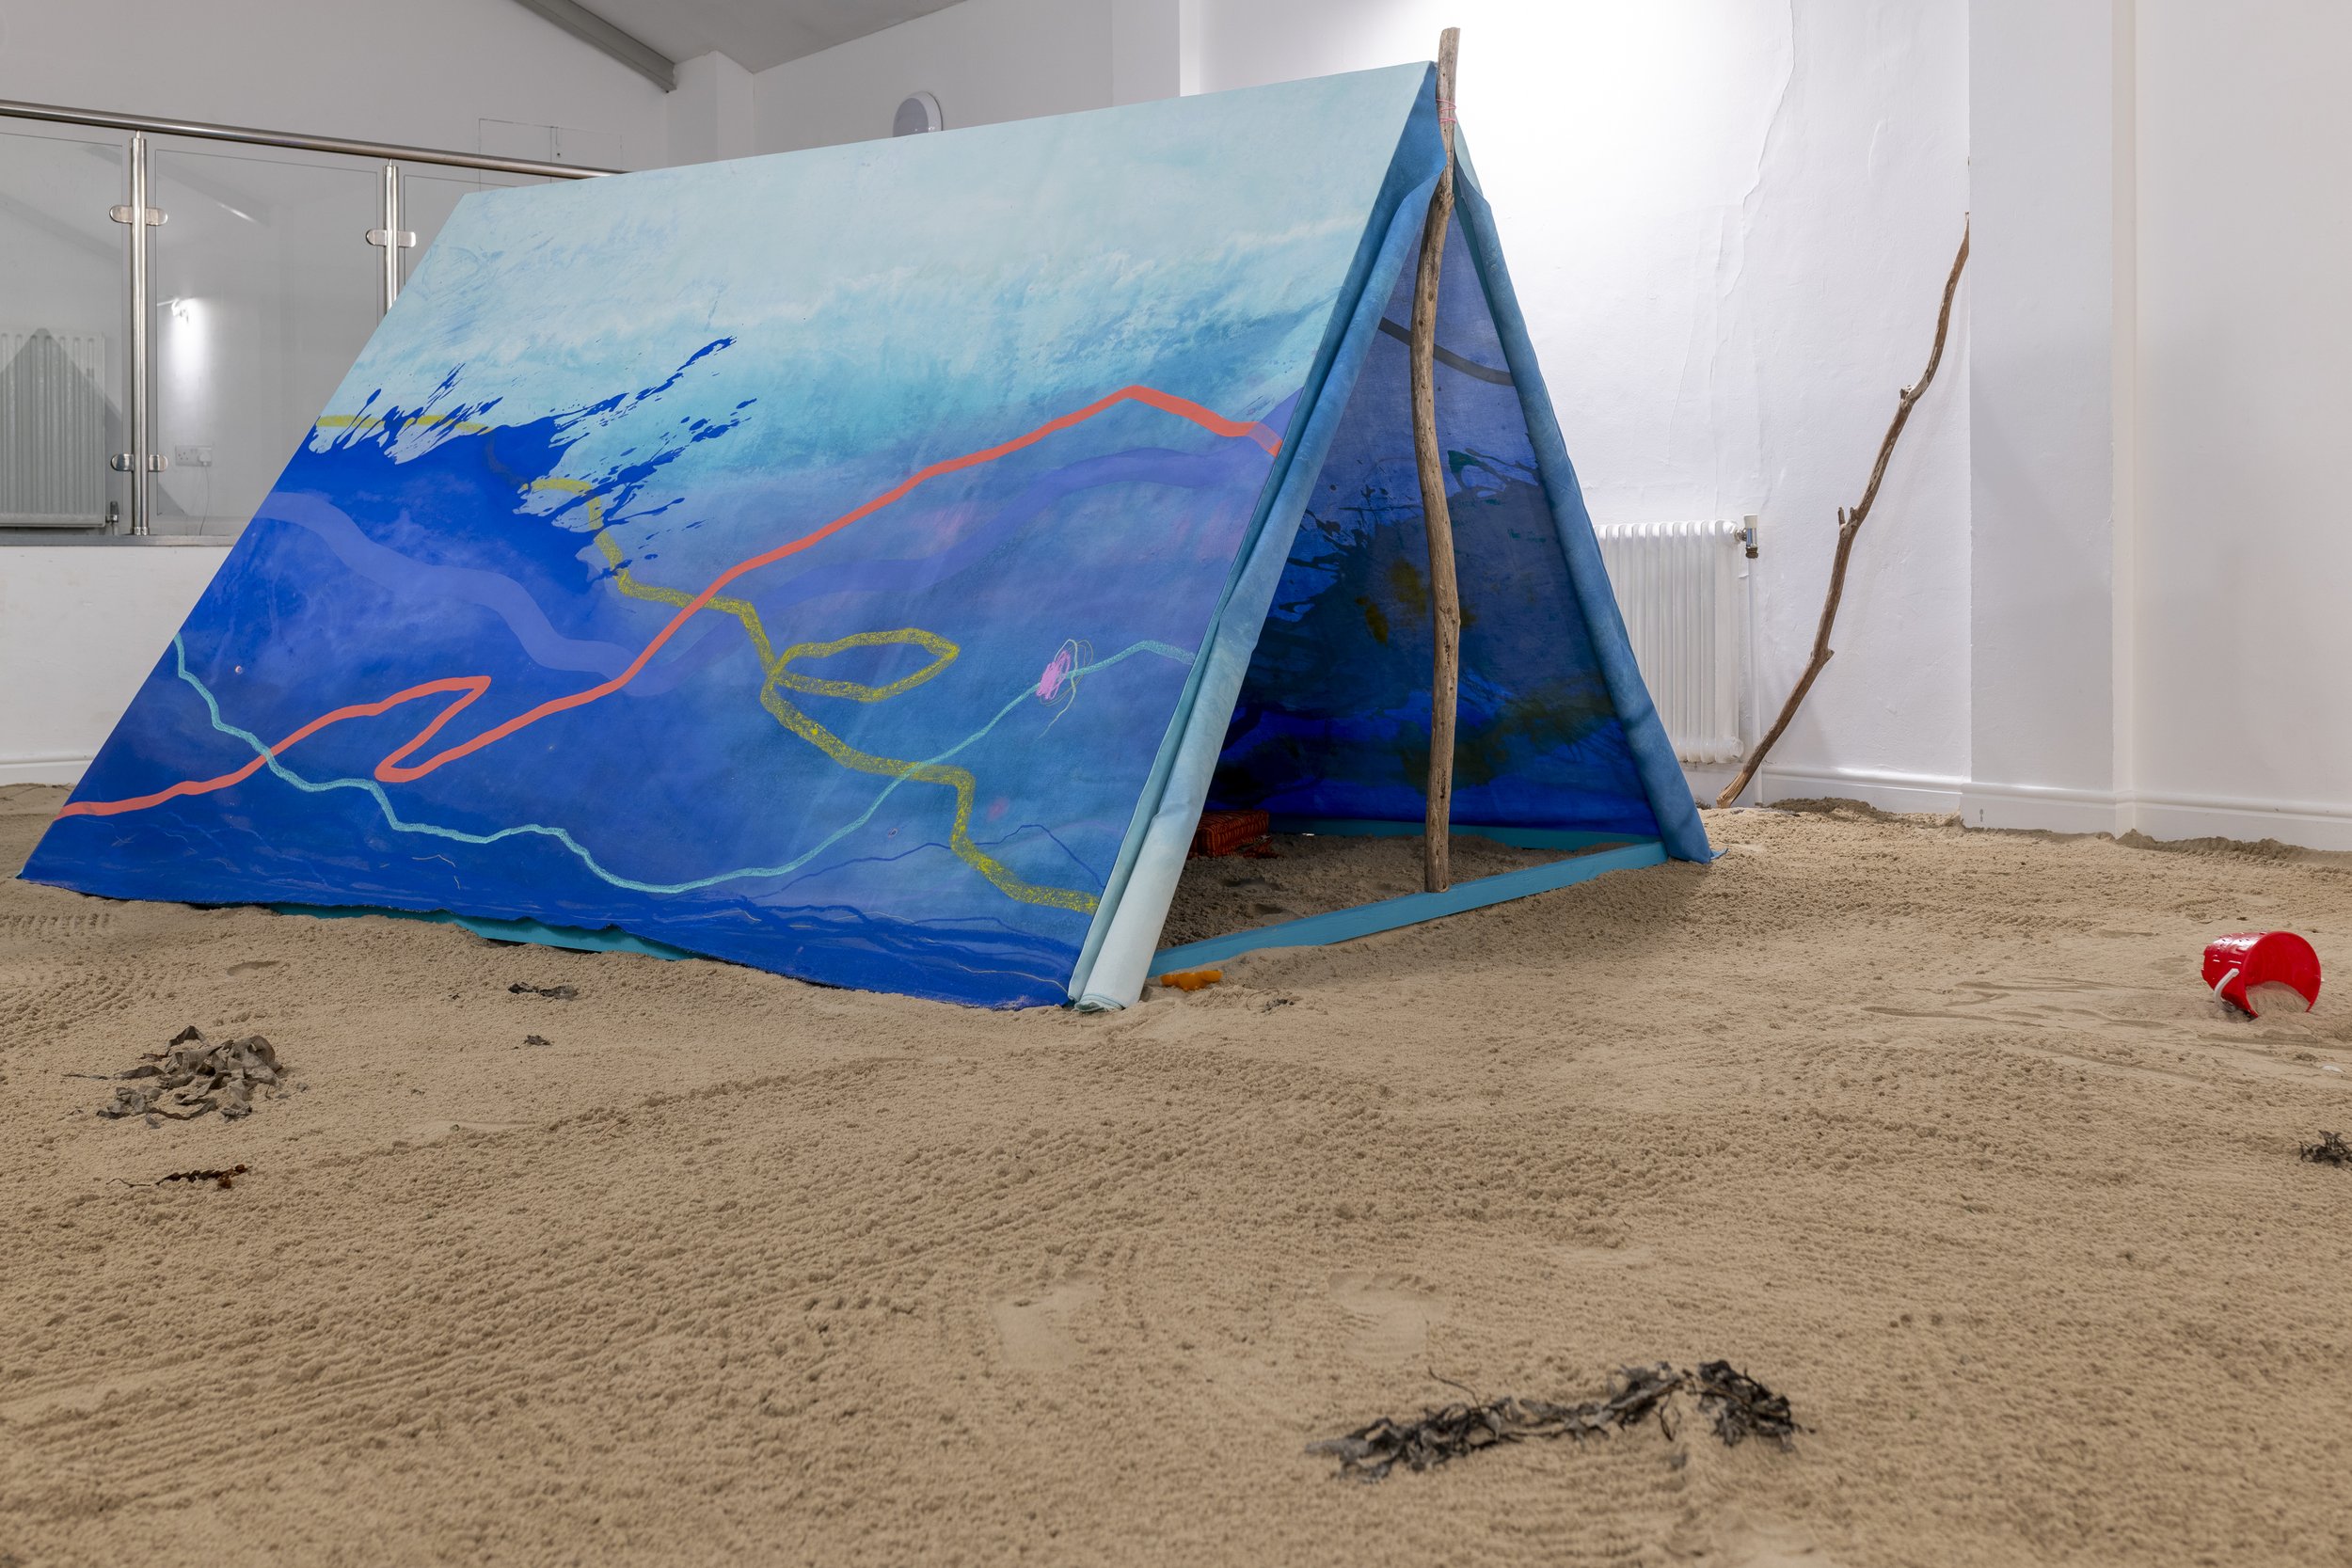  Tent - acrylic, oil and pastel painting on canvas270w x 200h x 235d cm  Wexford sand, seaweed, driftwood and seaweed 